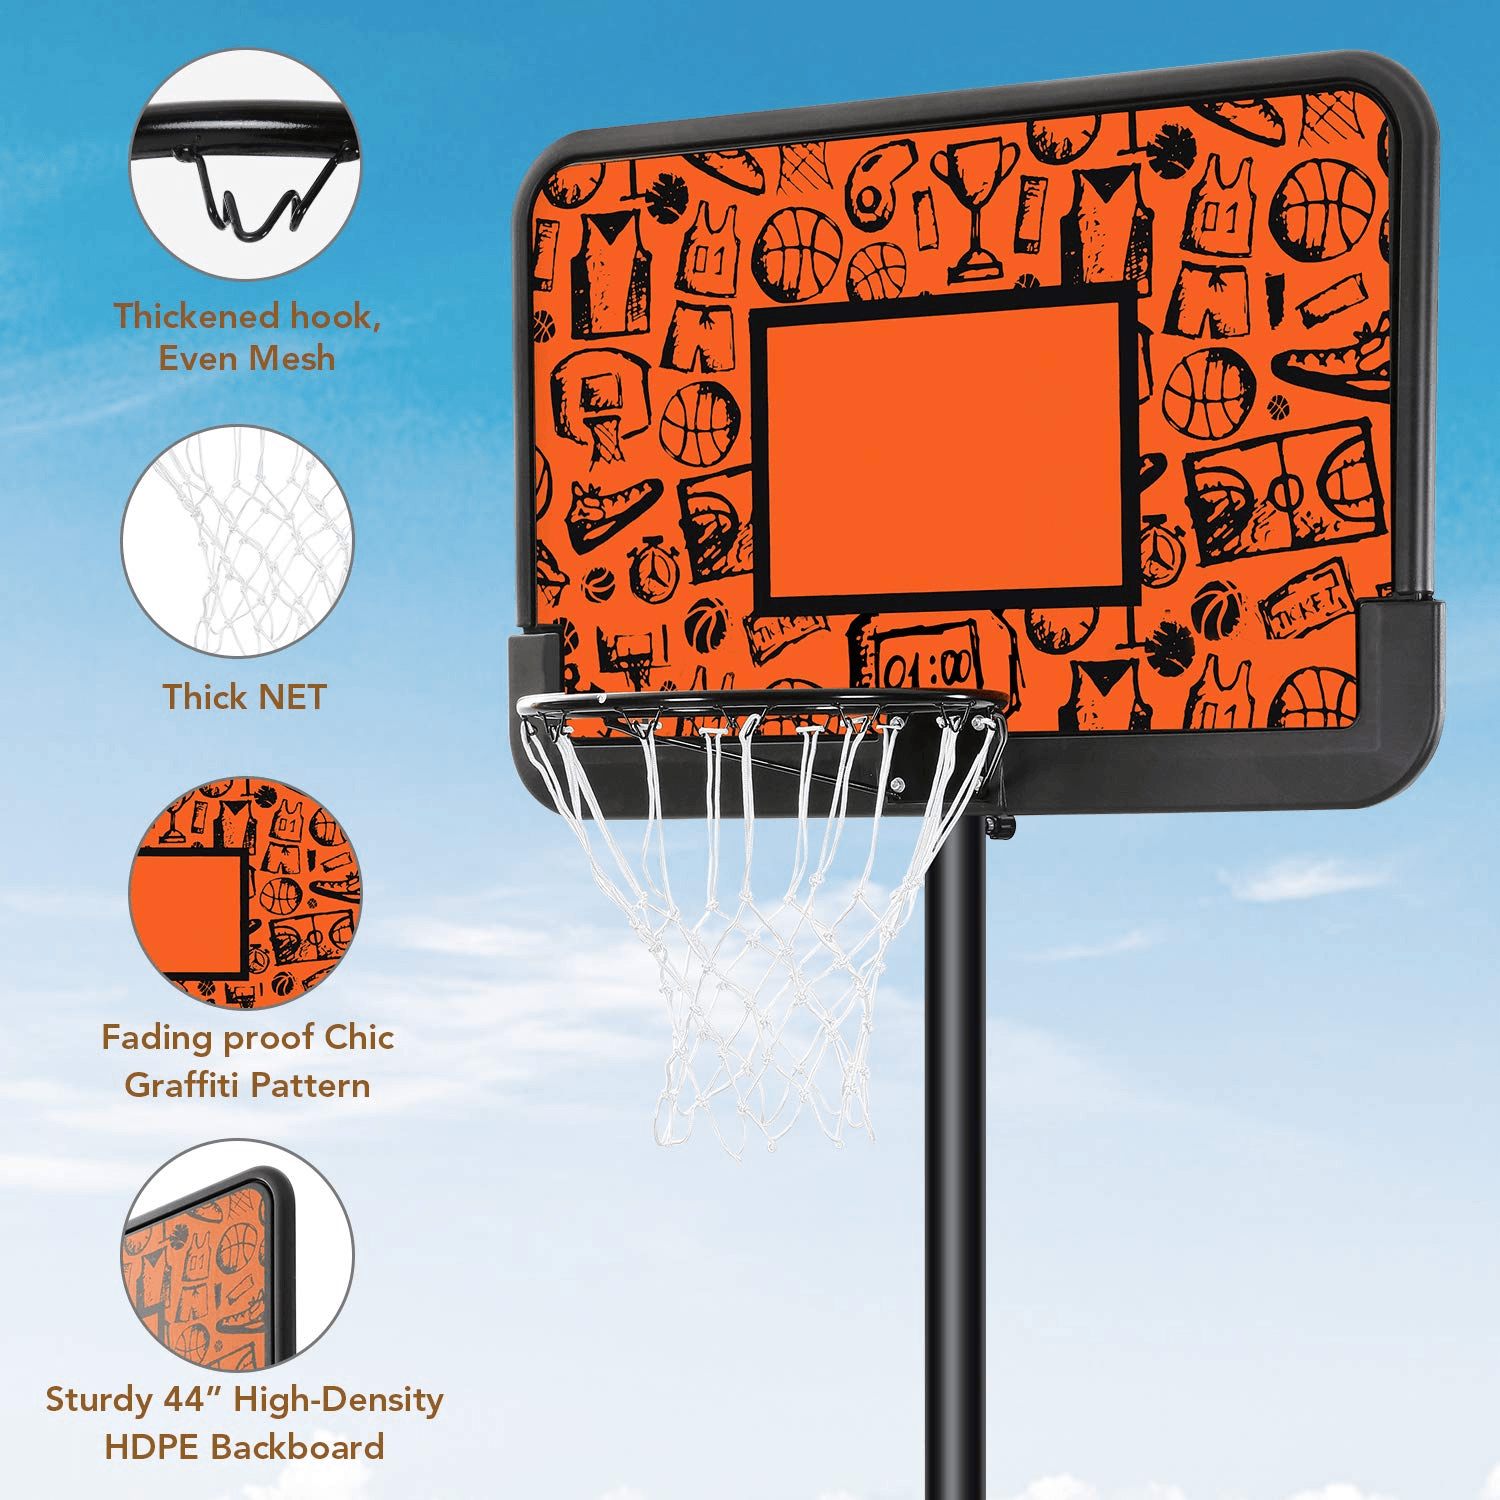 Load image into Gallery viewer, MaxKare Basketball Hoop Goal Portable Basketball System Set Stand Adjustable Height Poolside Outdoor Indoor for Kid Adult Pool W Aluminum Alloy Anti-Rust Large Backboard - NAIPO
